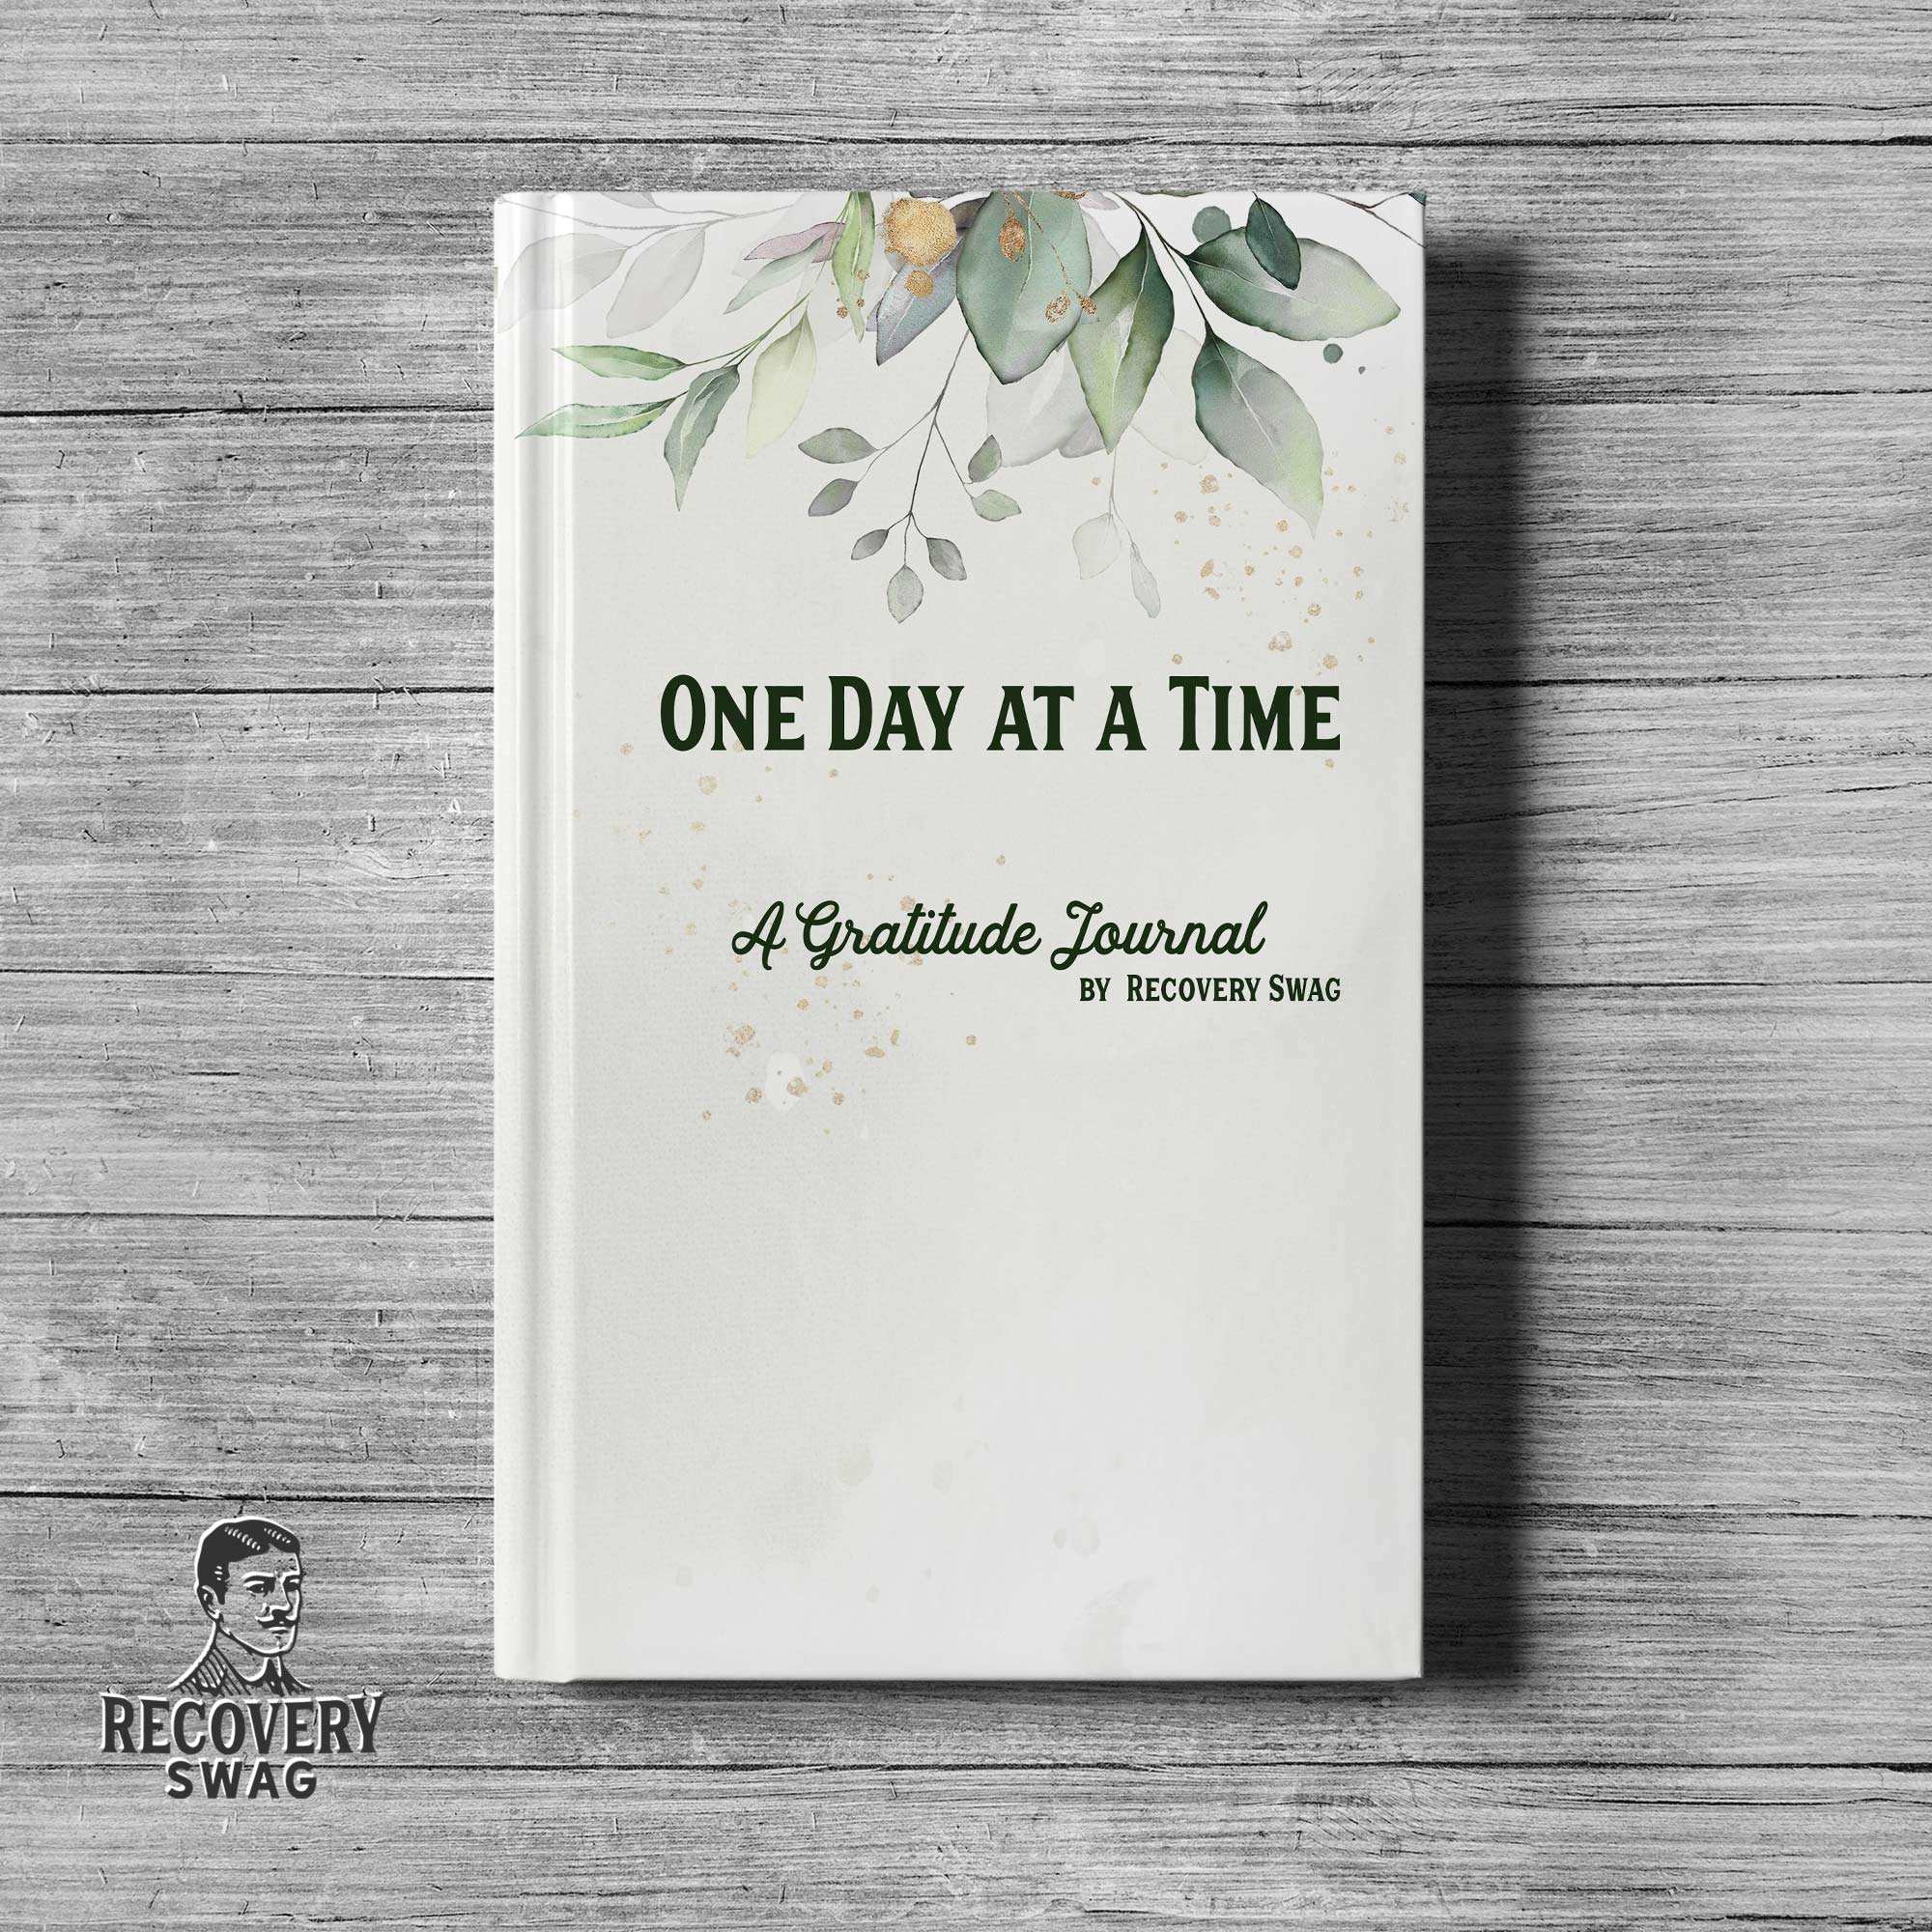 One Day at a Time - A Gratitude Journal